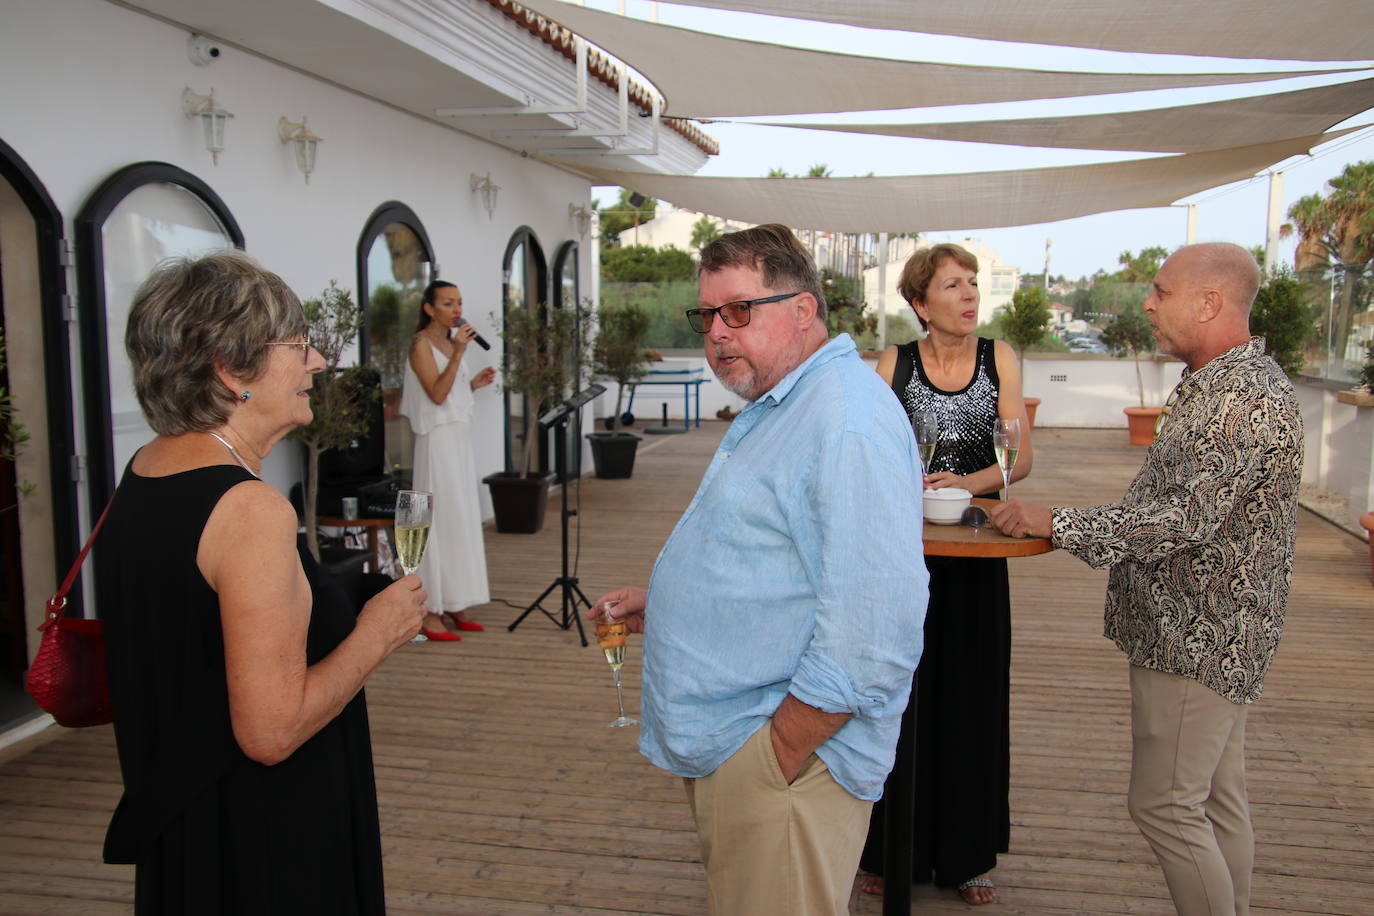 Tuesday’s gala dinner for the Costa Press Club's 20th anniversary was attended by members and guests, including representatives of the Spanish press association and Malaga University